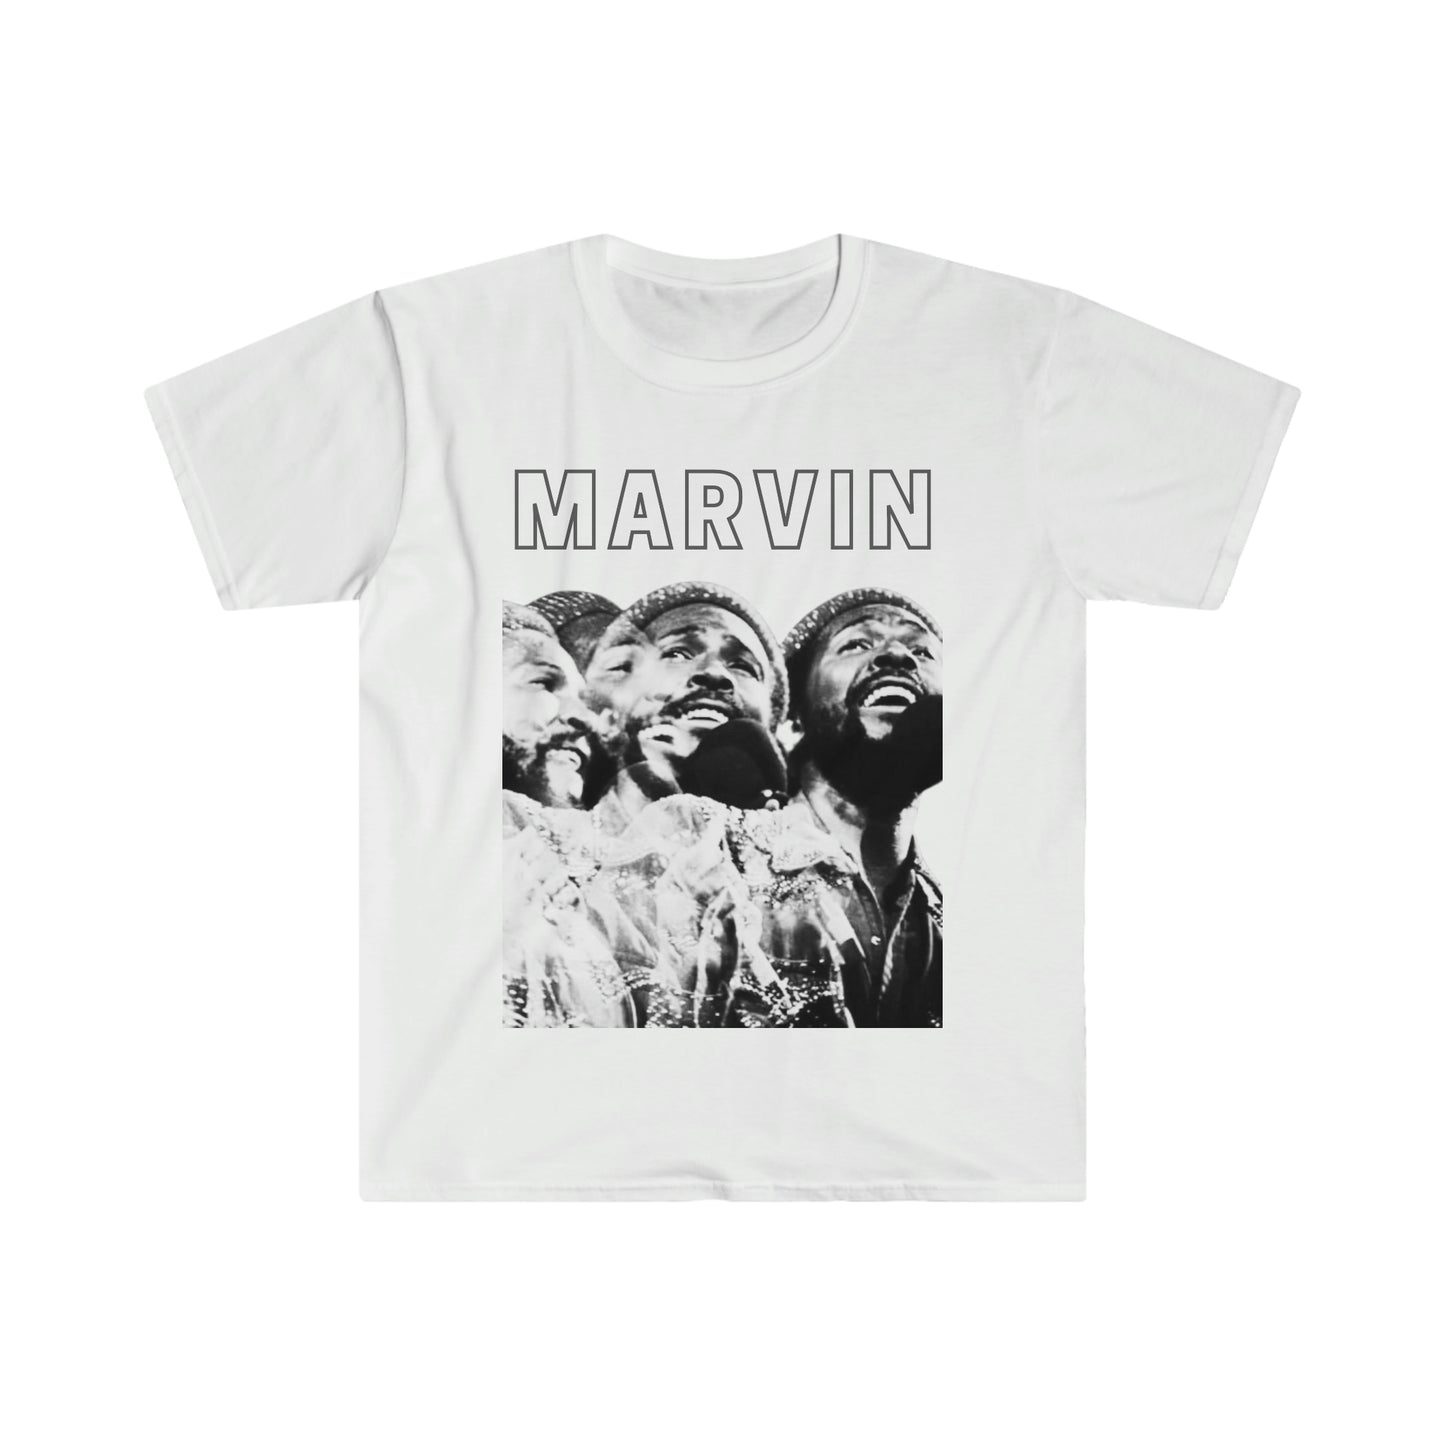 MARVIN Classic Fit AmplifyDestroy Print Tee Shirt